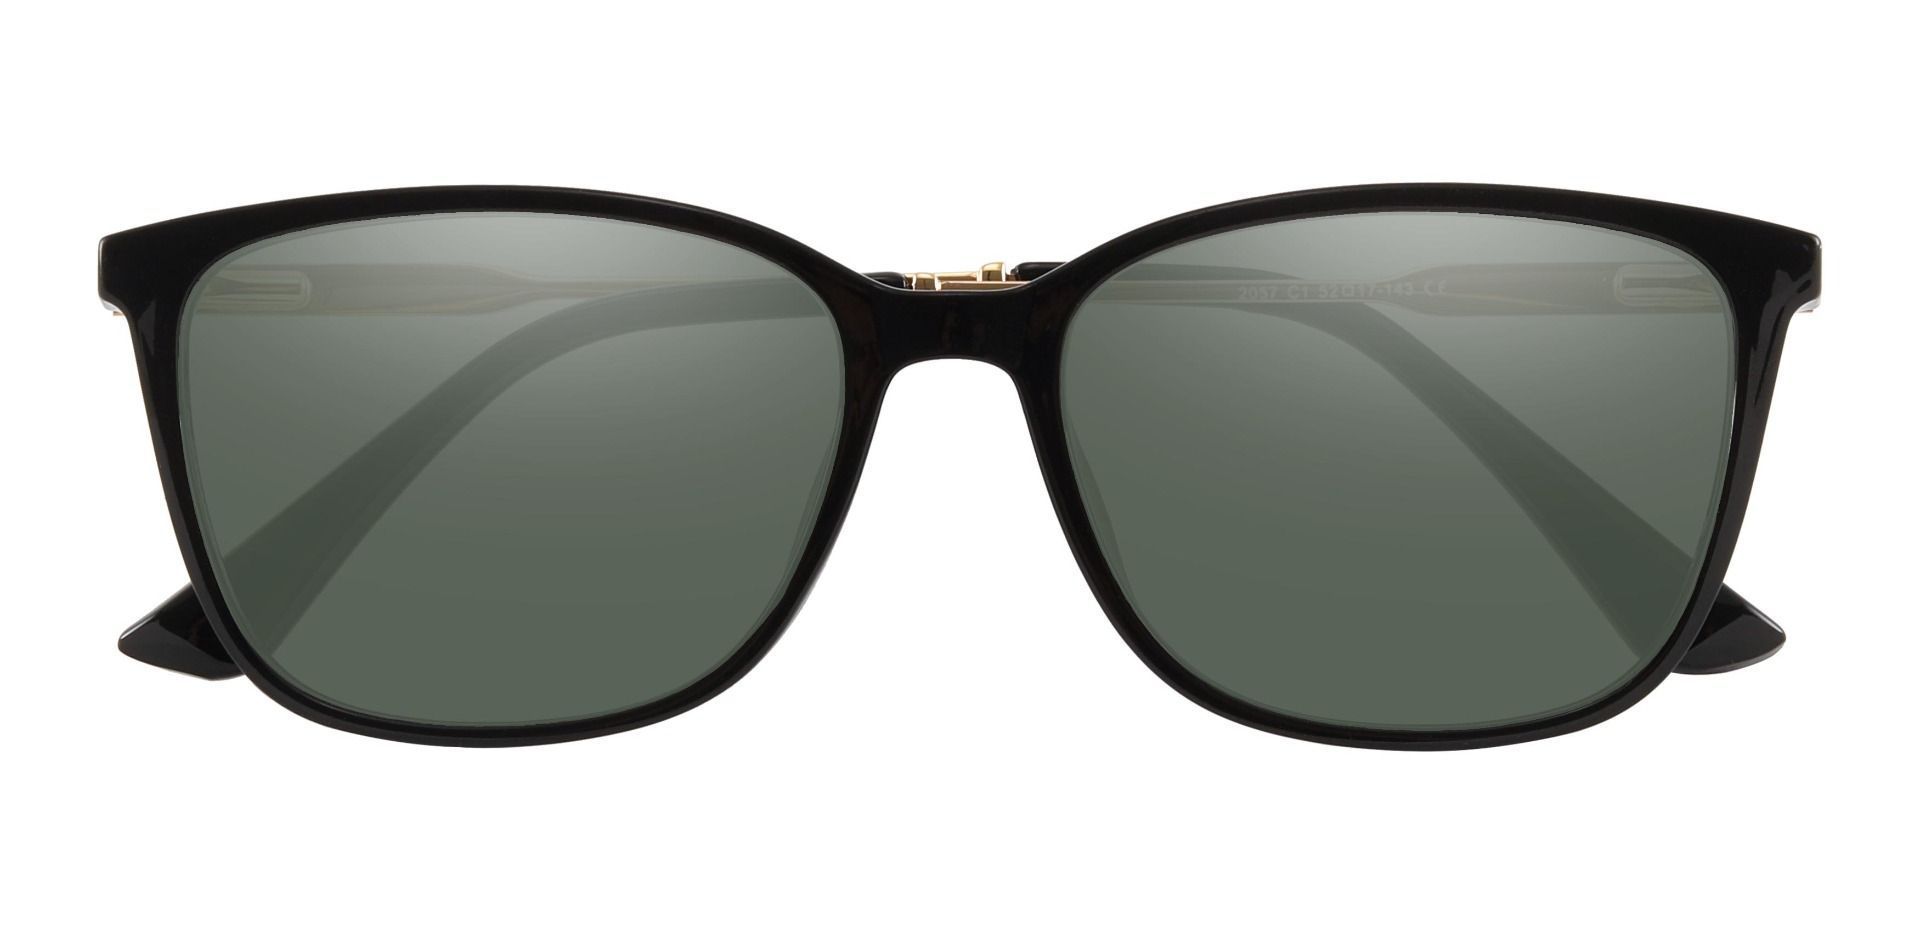 Miami Rectangle Reading Sunglasses - Black Frame With Green Lenses